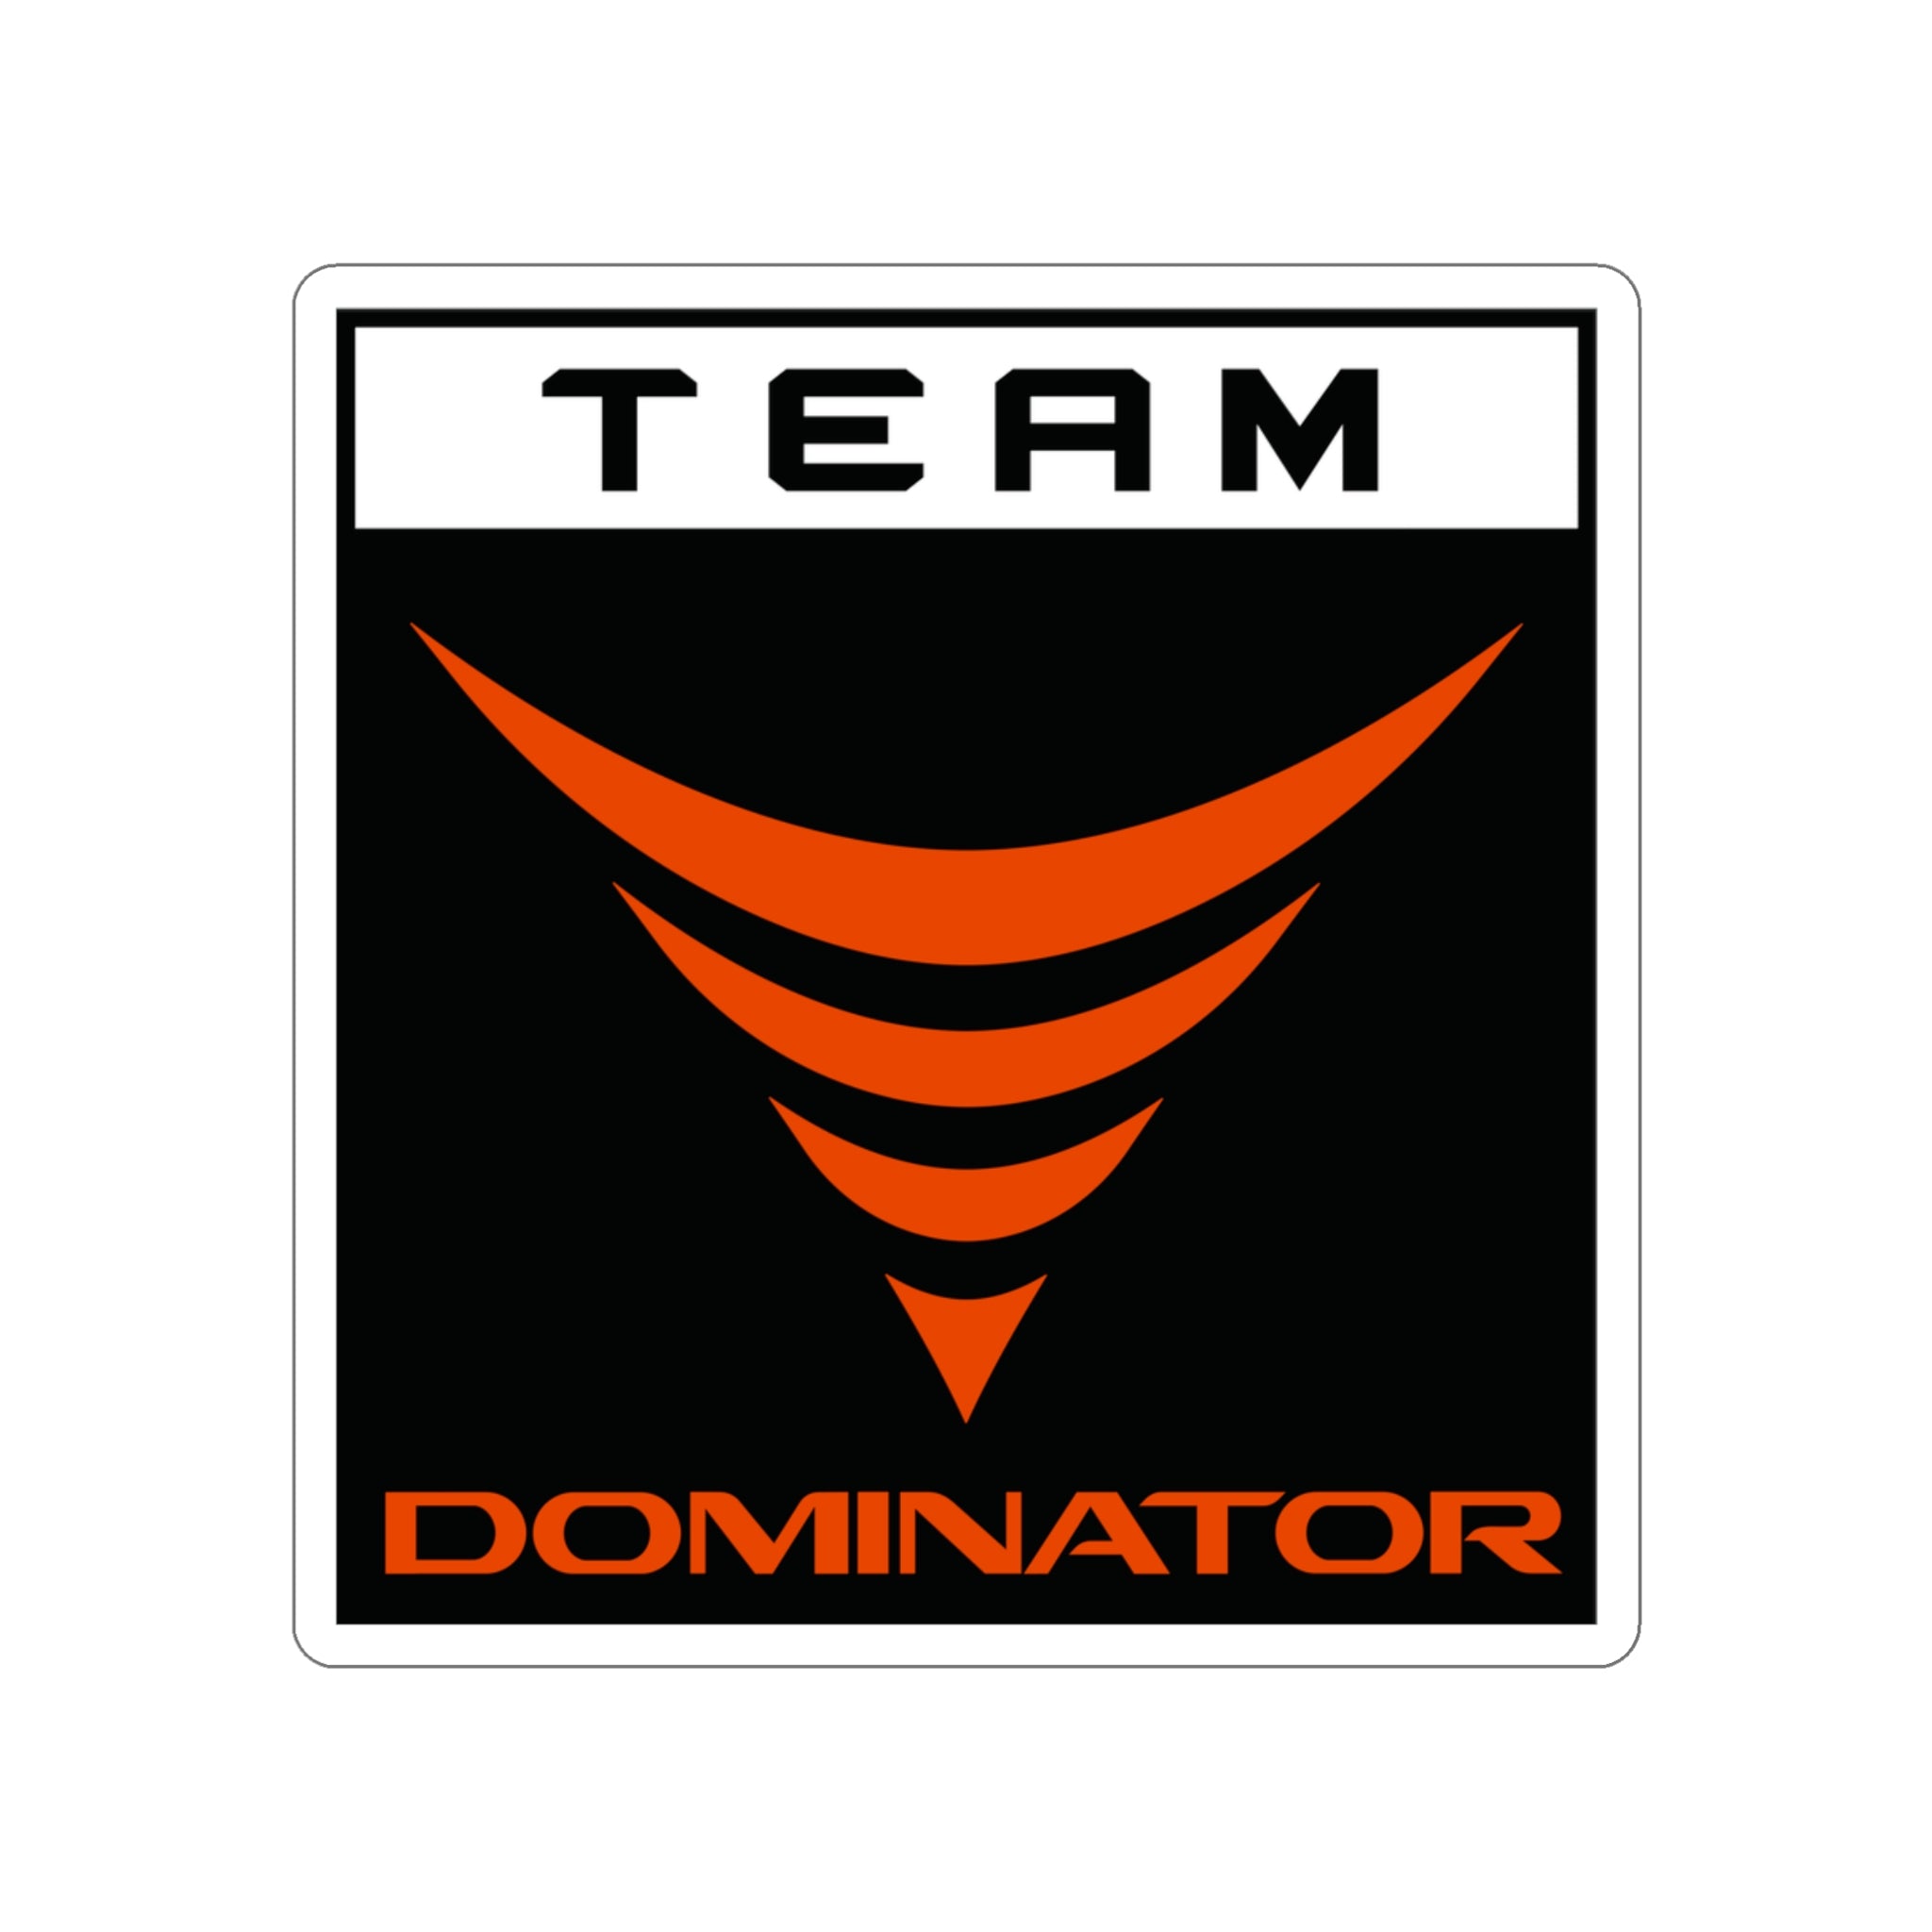 Download Dominator Logo PNG and Vector (PDF, SVG, Ai, EPS) Free